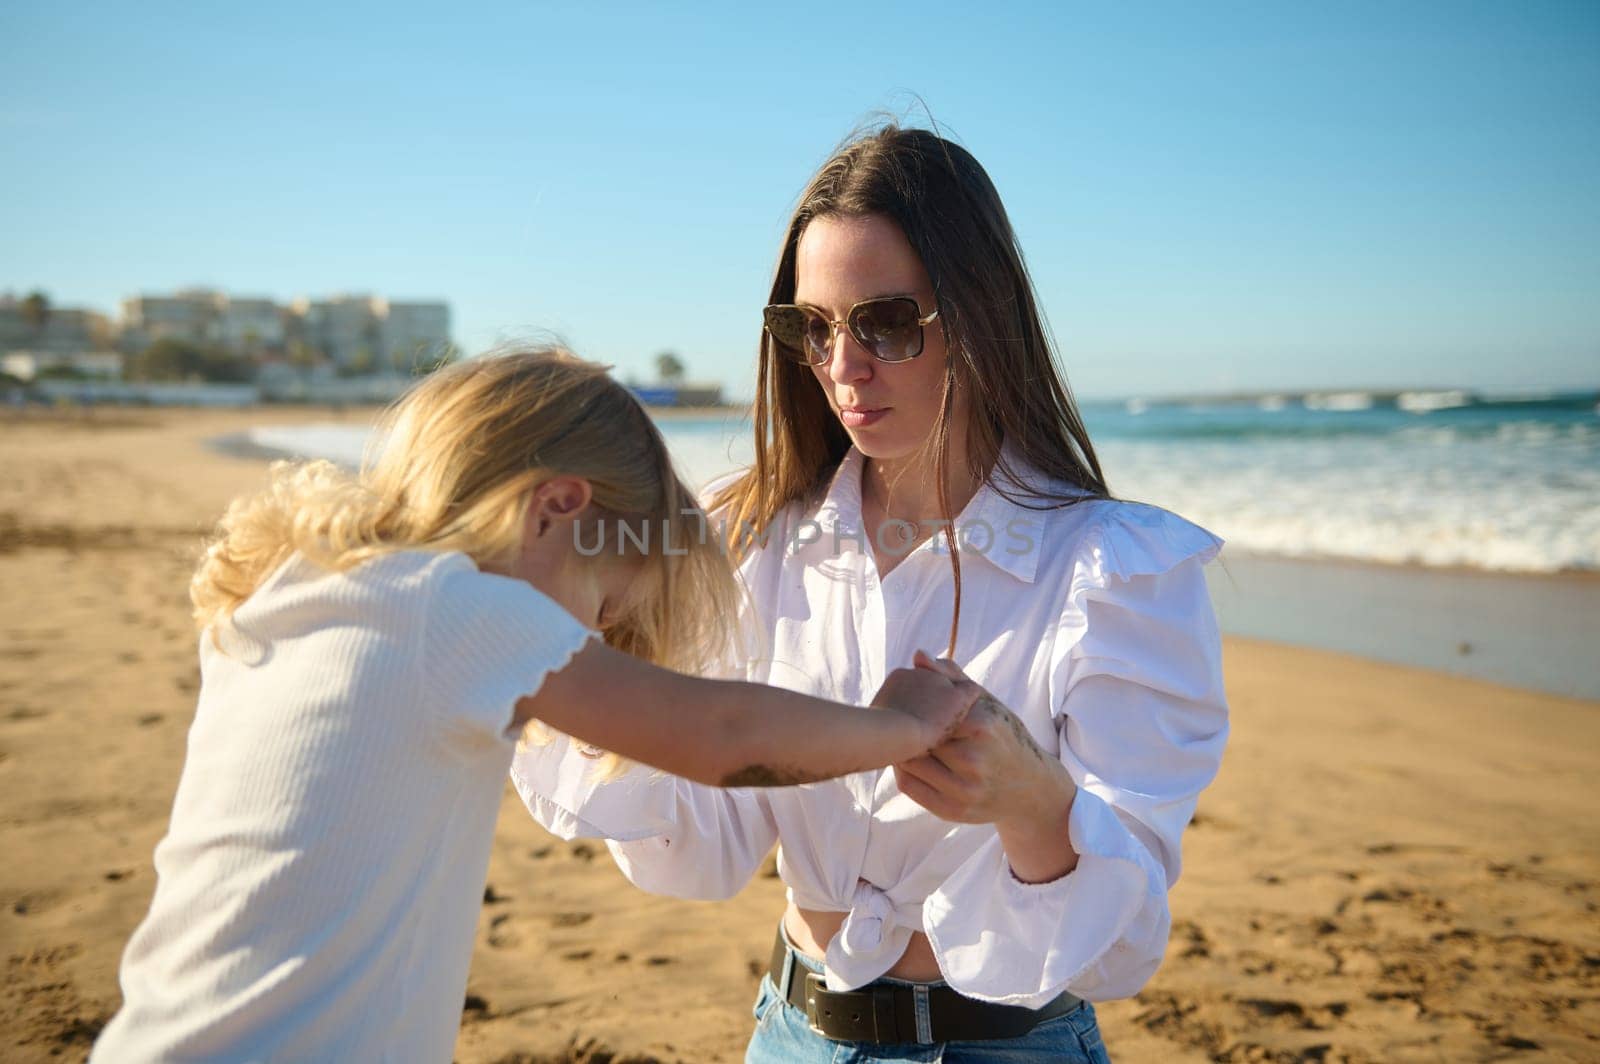 Mom and daughter holding hands while playing together on the beach on warm sunny day by artgf